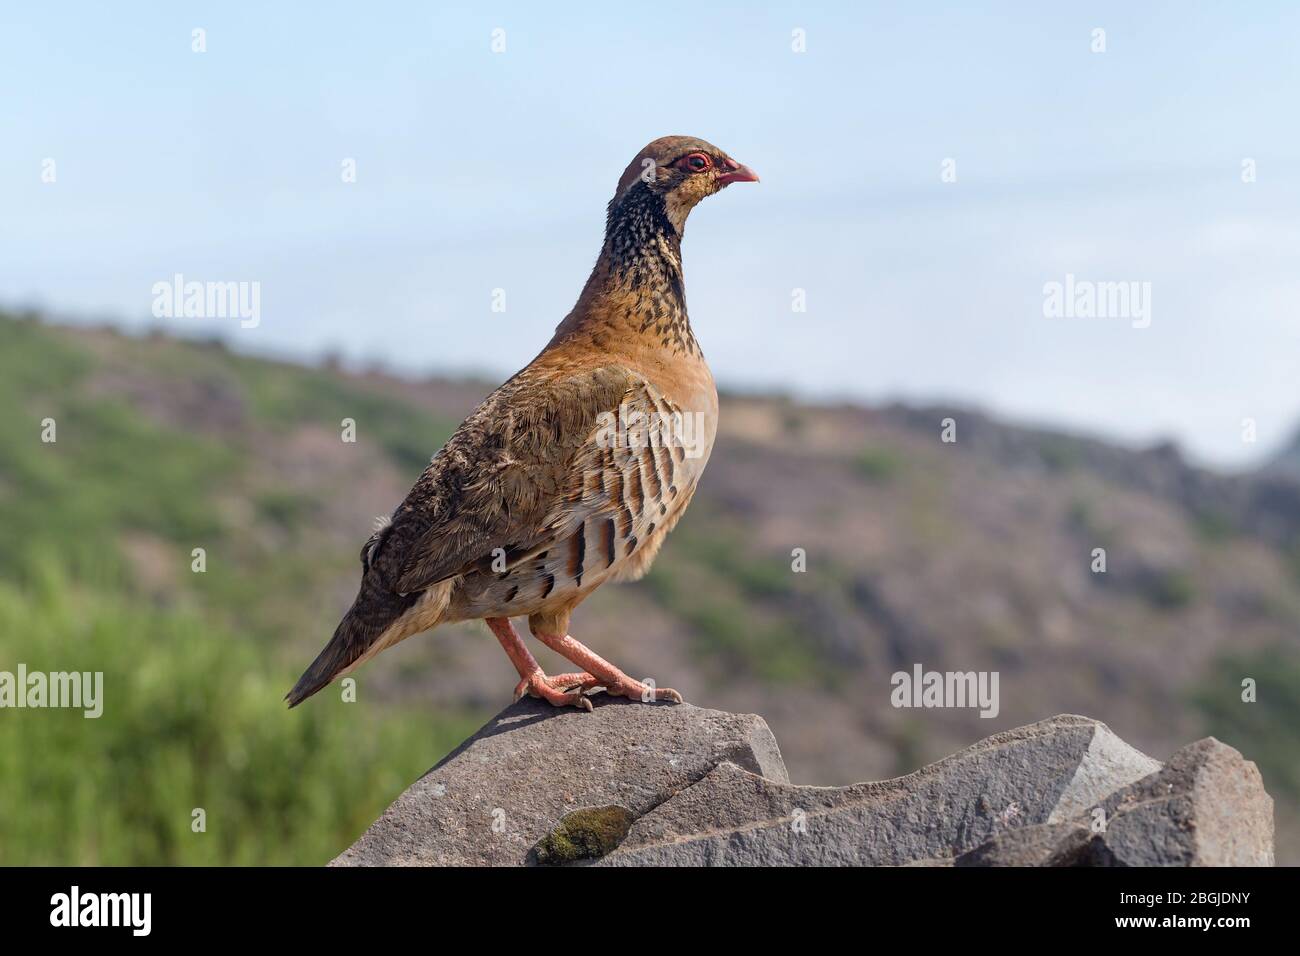 The rock partridge Alectoris graeca birds a bird on a hiking trail in the mountains of Madeira Stock Photo